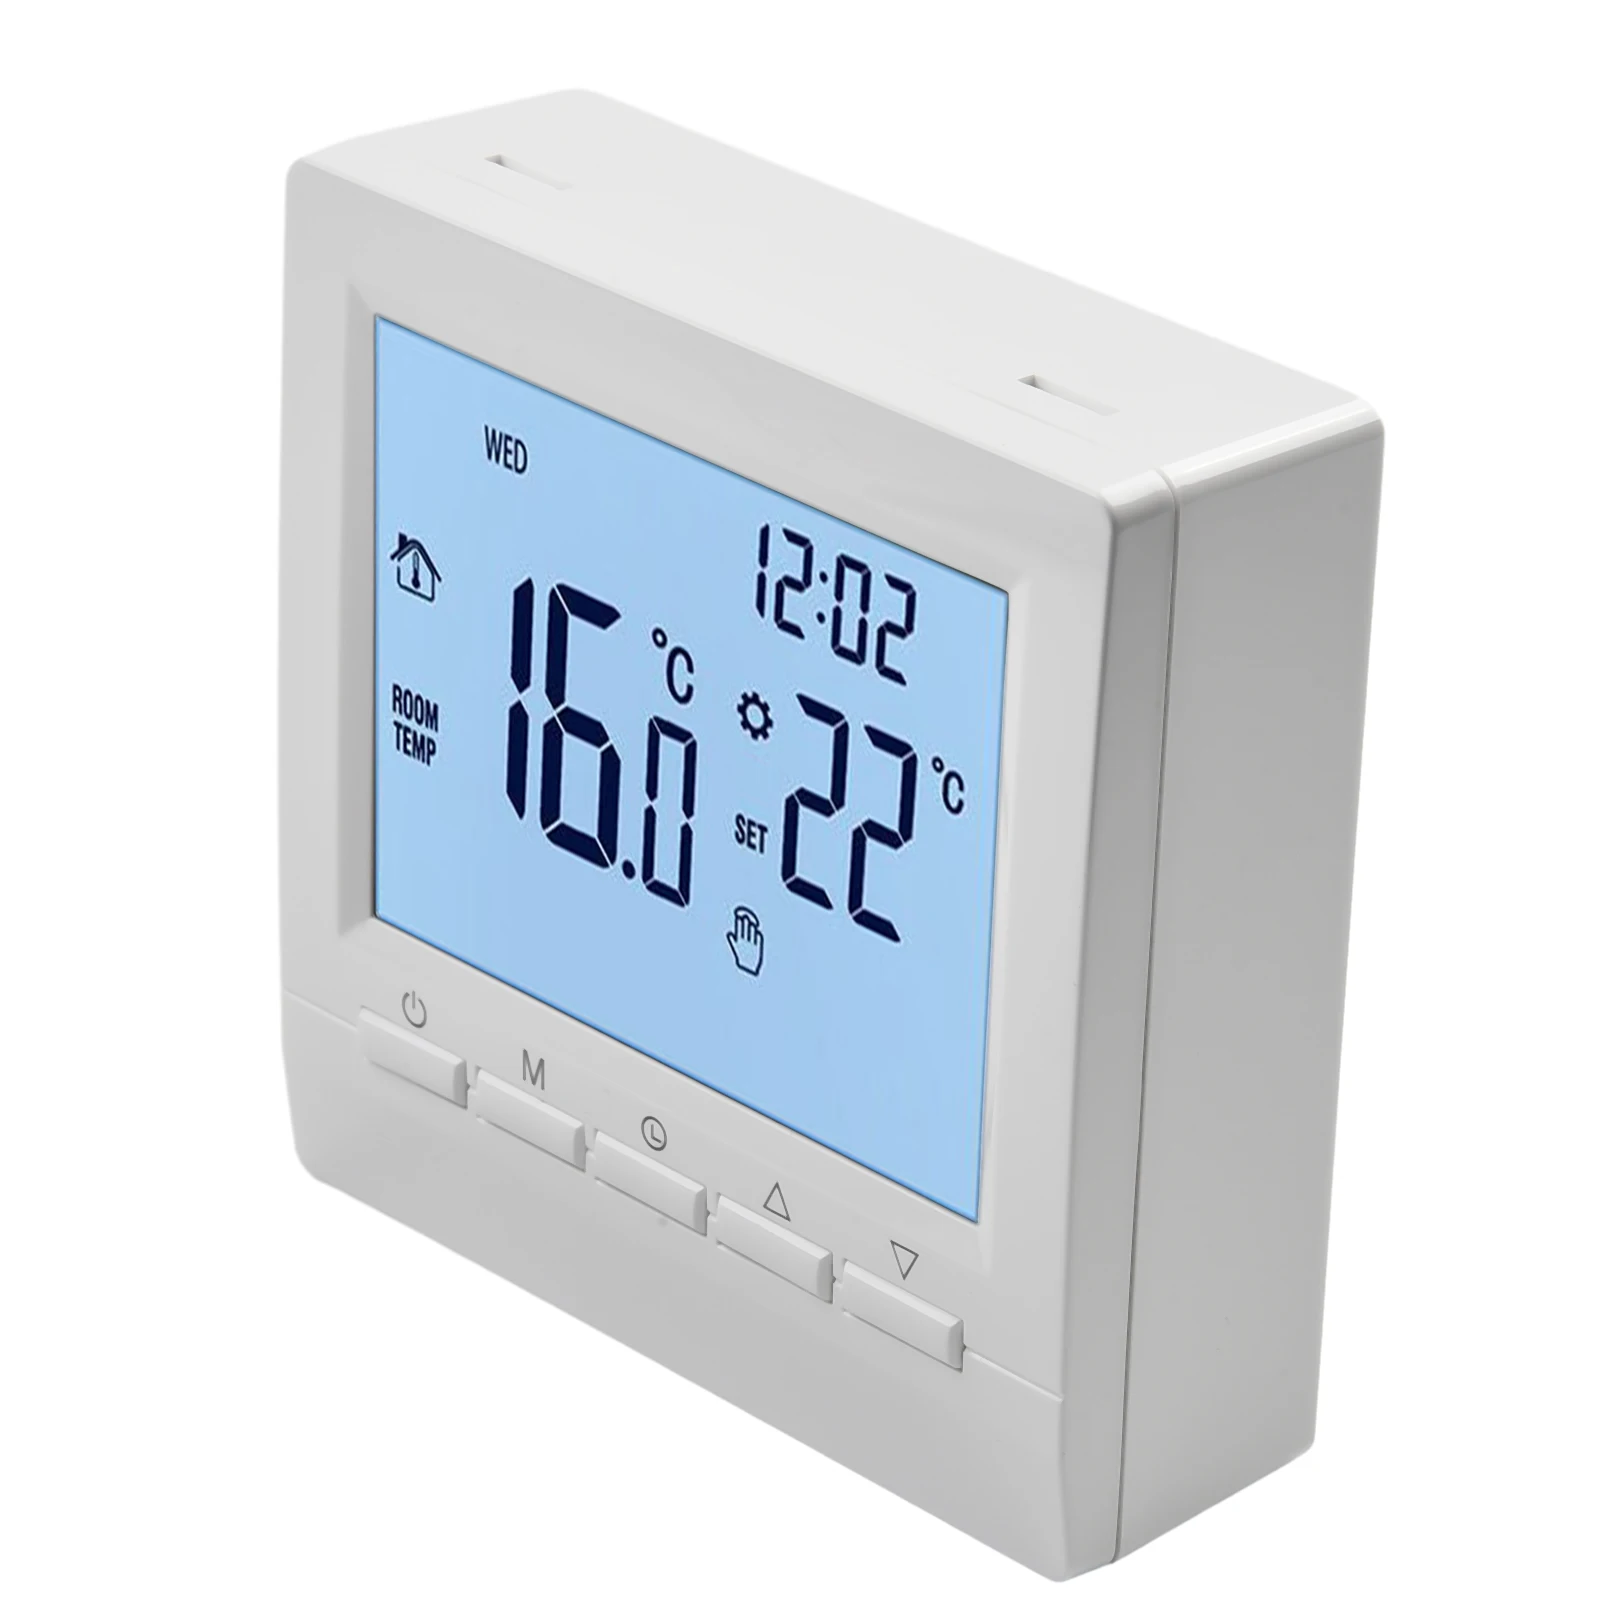 

1PC LCD Room Temperature Controller, Gas Boiler Thermostat, Wall Or Stand Placement, Battery Powered, Easy Installation